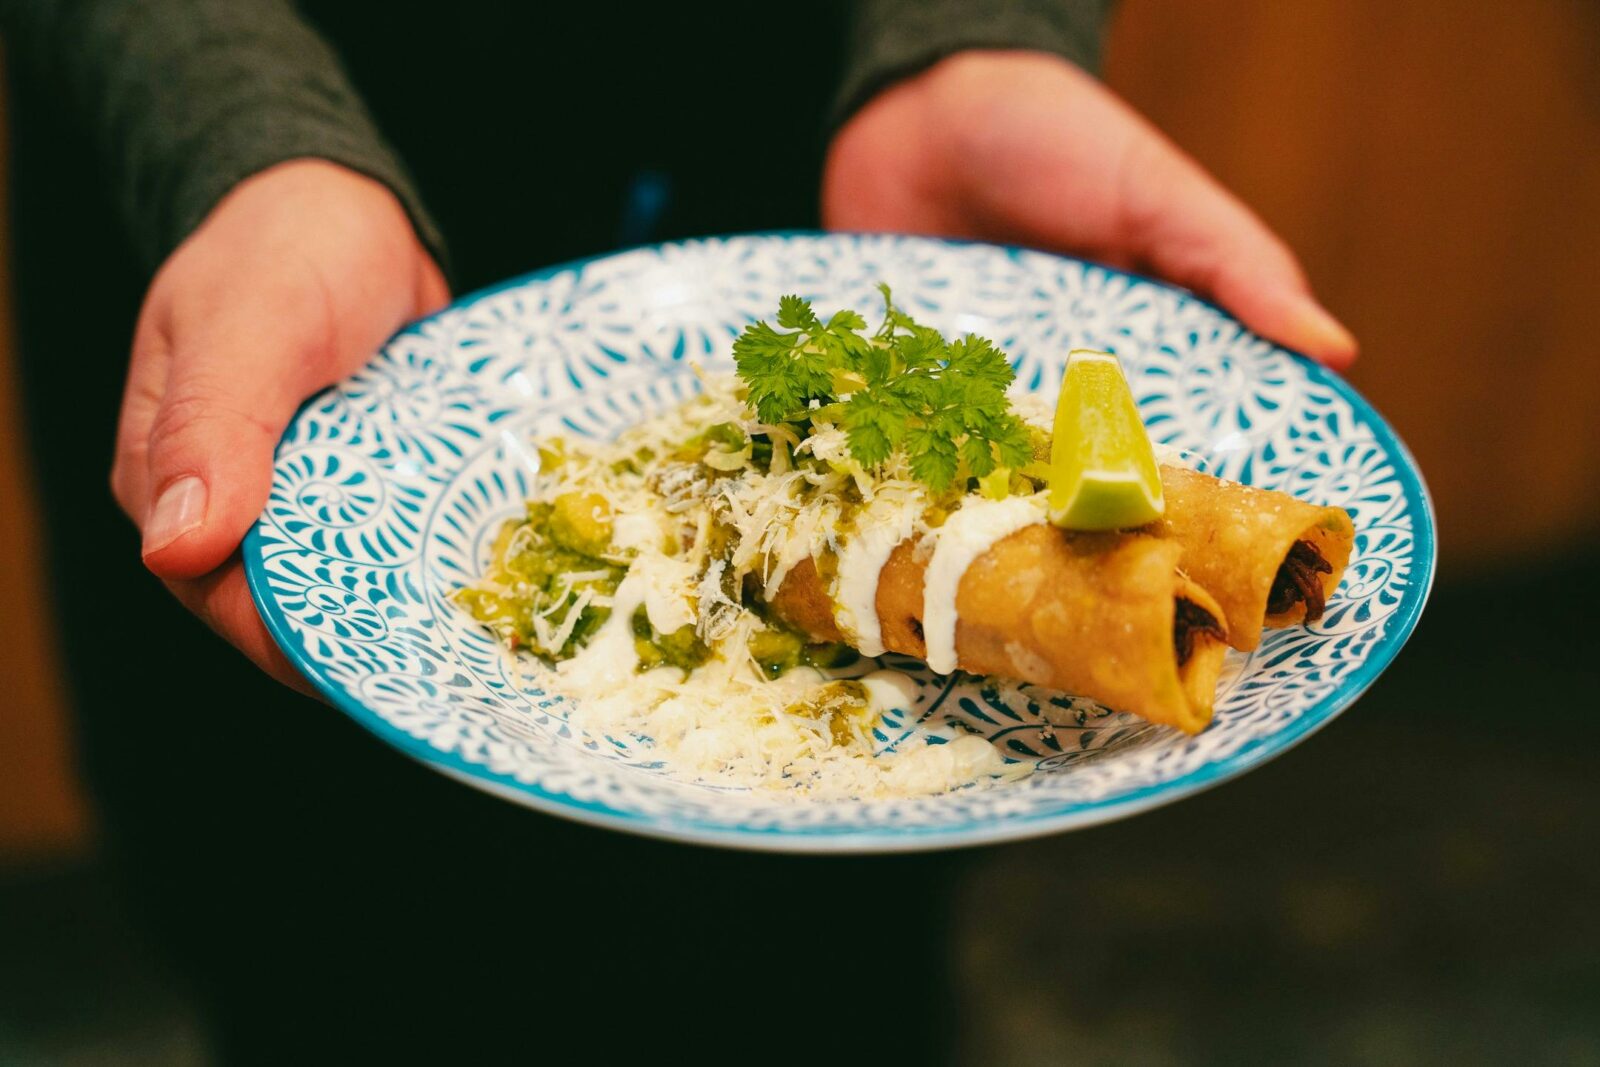 Better known as golden taco (dorados) from Hidalgo: Steamed Lamb+ sour cream +cotija cheese + avo.